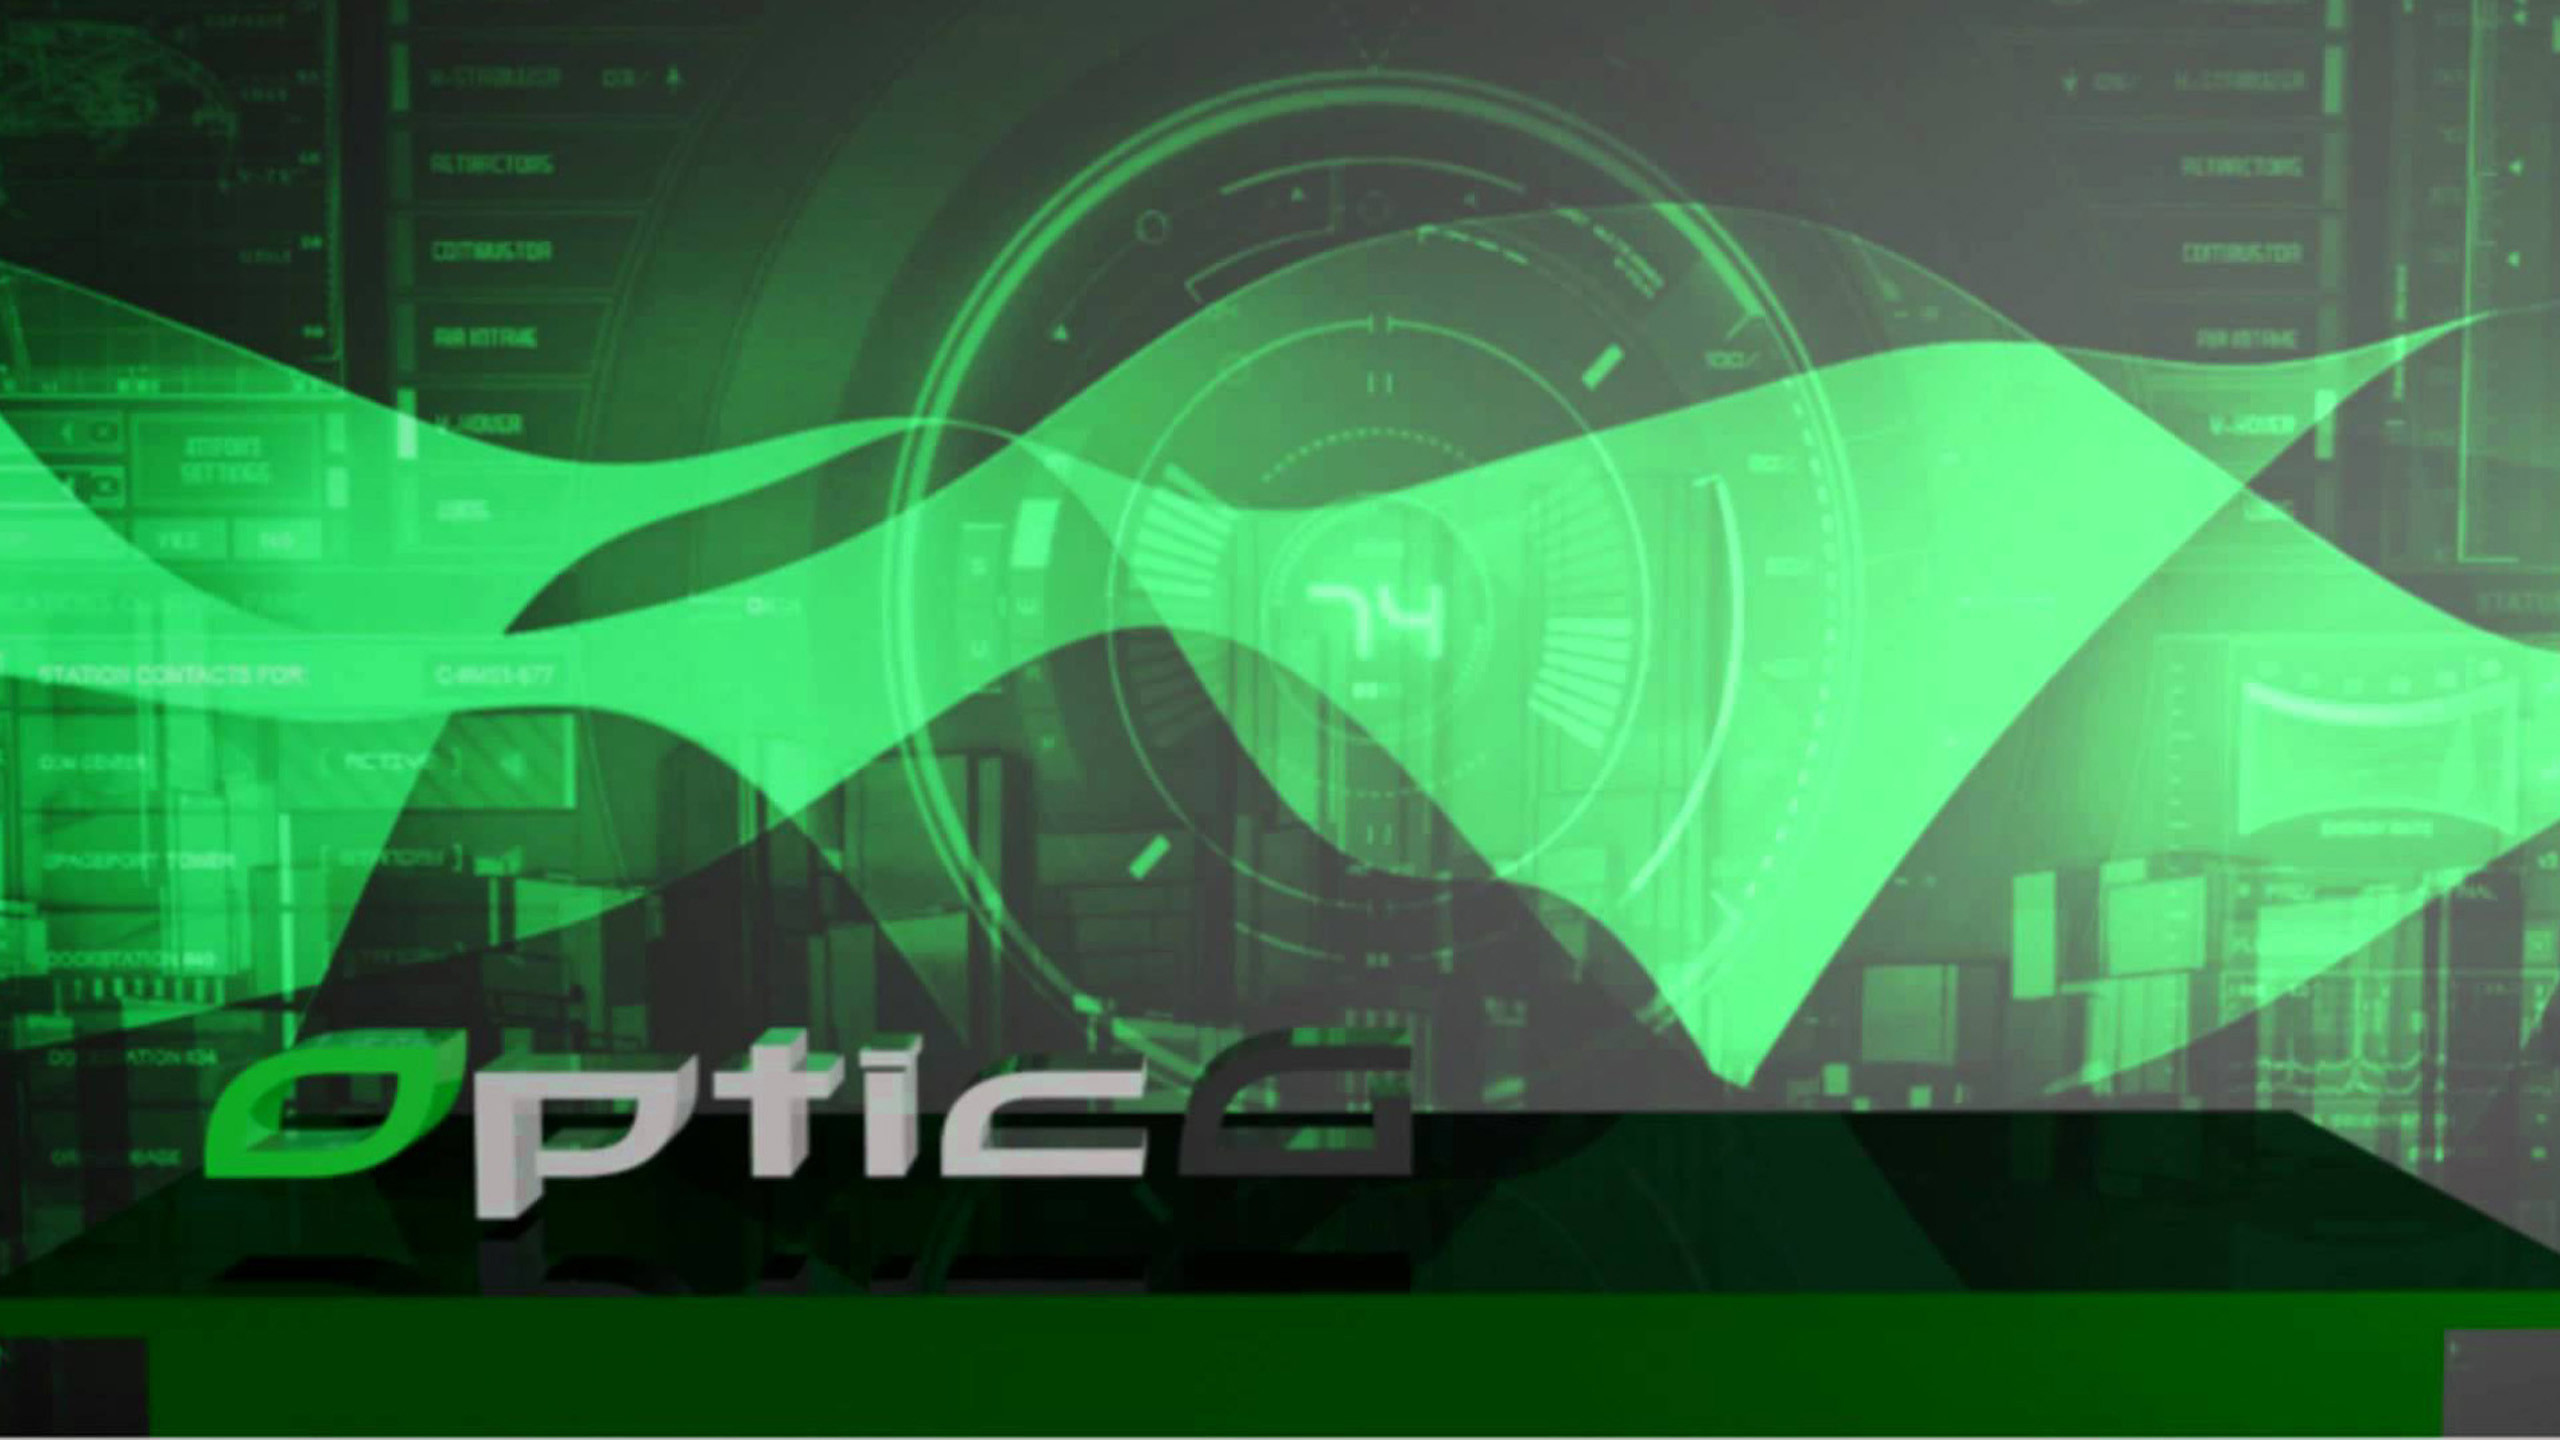 2560x1440 optic gaming wallpaper photos hd wallpapers high definition amazing cool  desktop wallpapers for windows tablet download free 2560Ã1440 Wallpaper HD